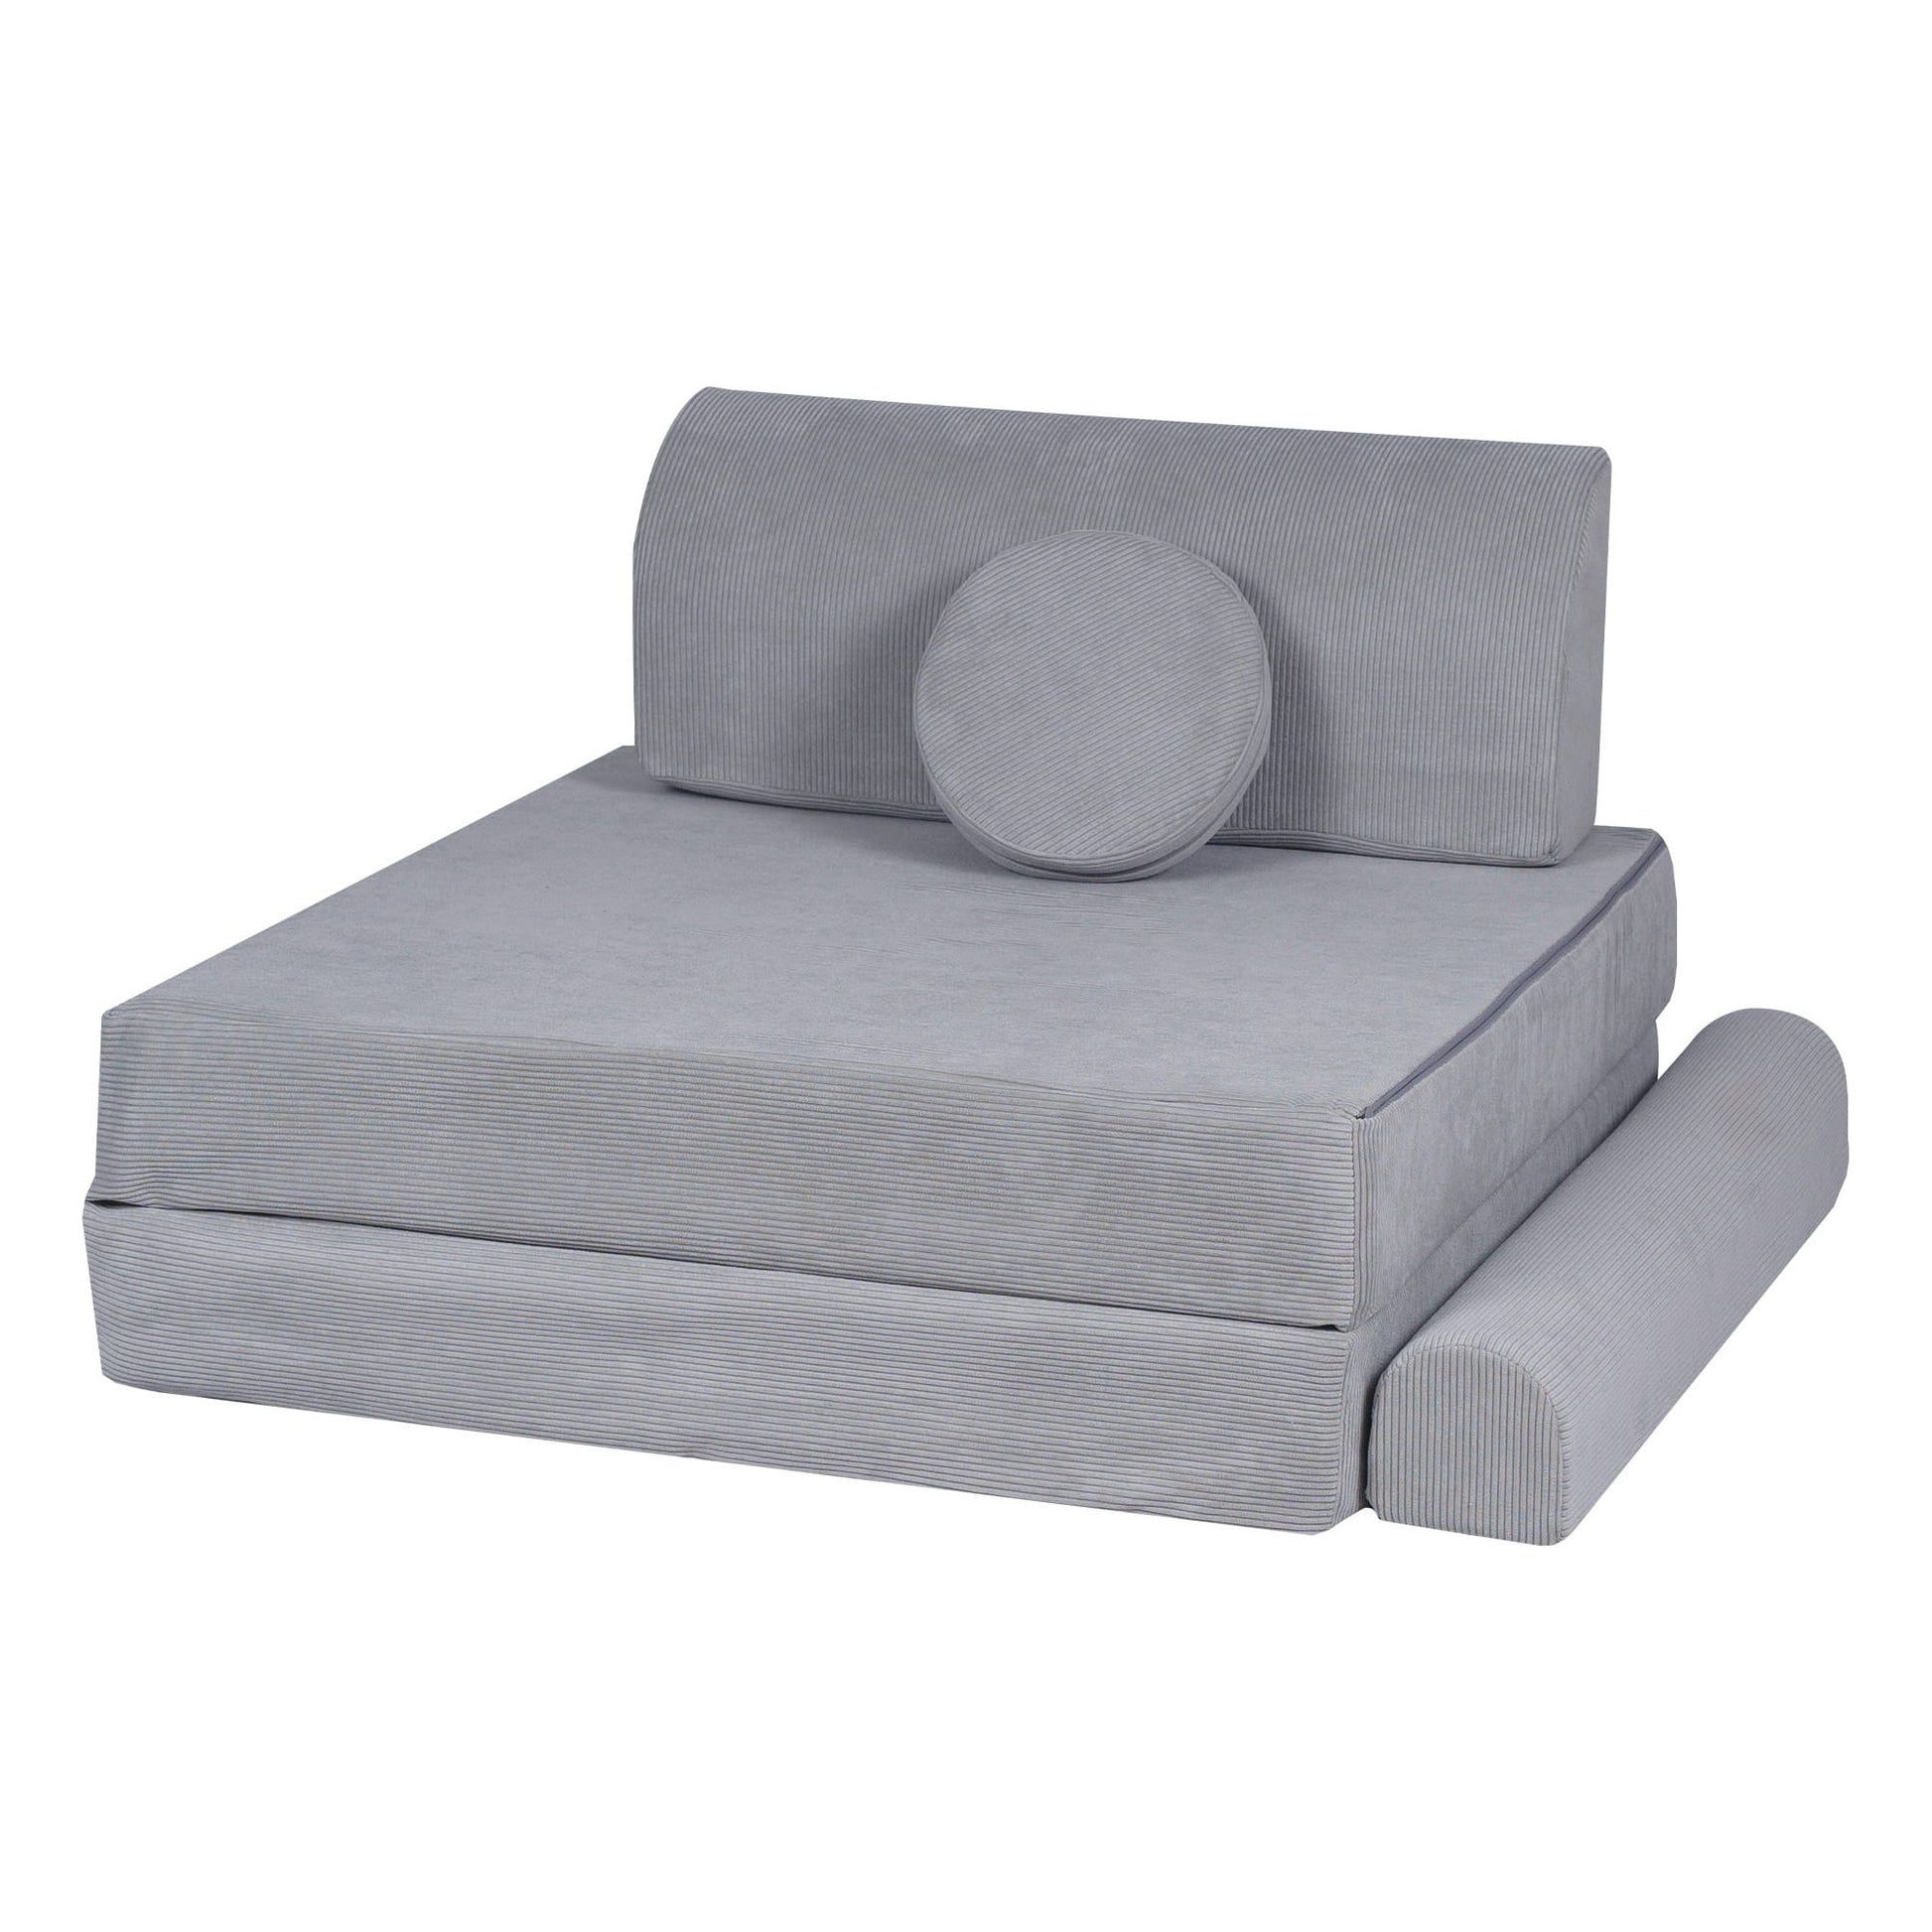 MeowBaby Kids Soft Play Sofa & Fold Out Bed - Corduroy Grey single seat close up